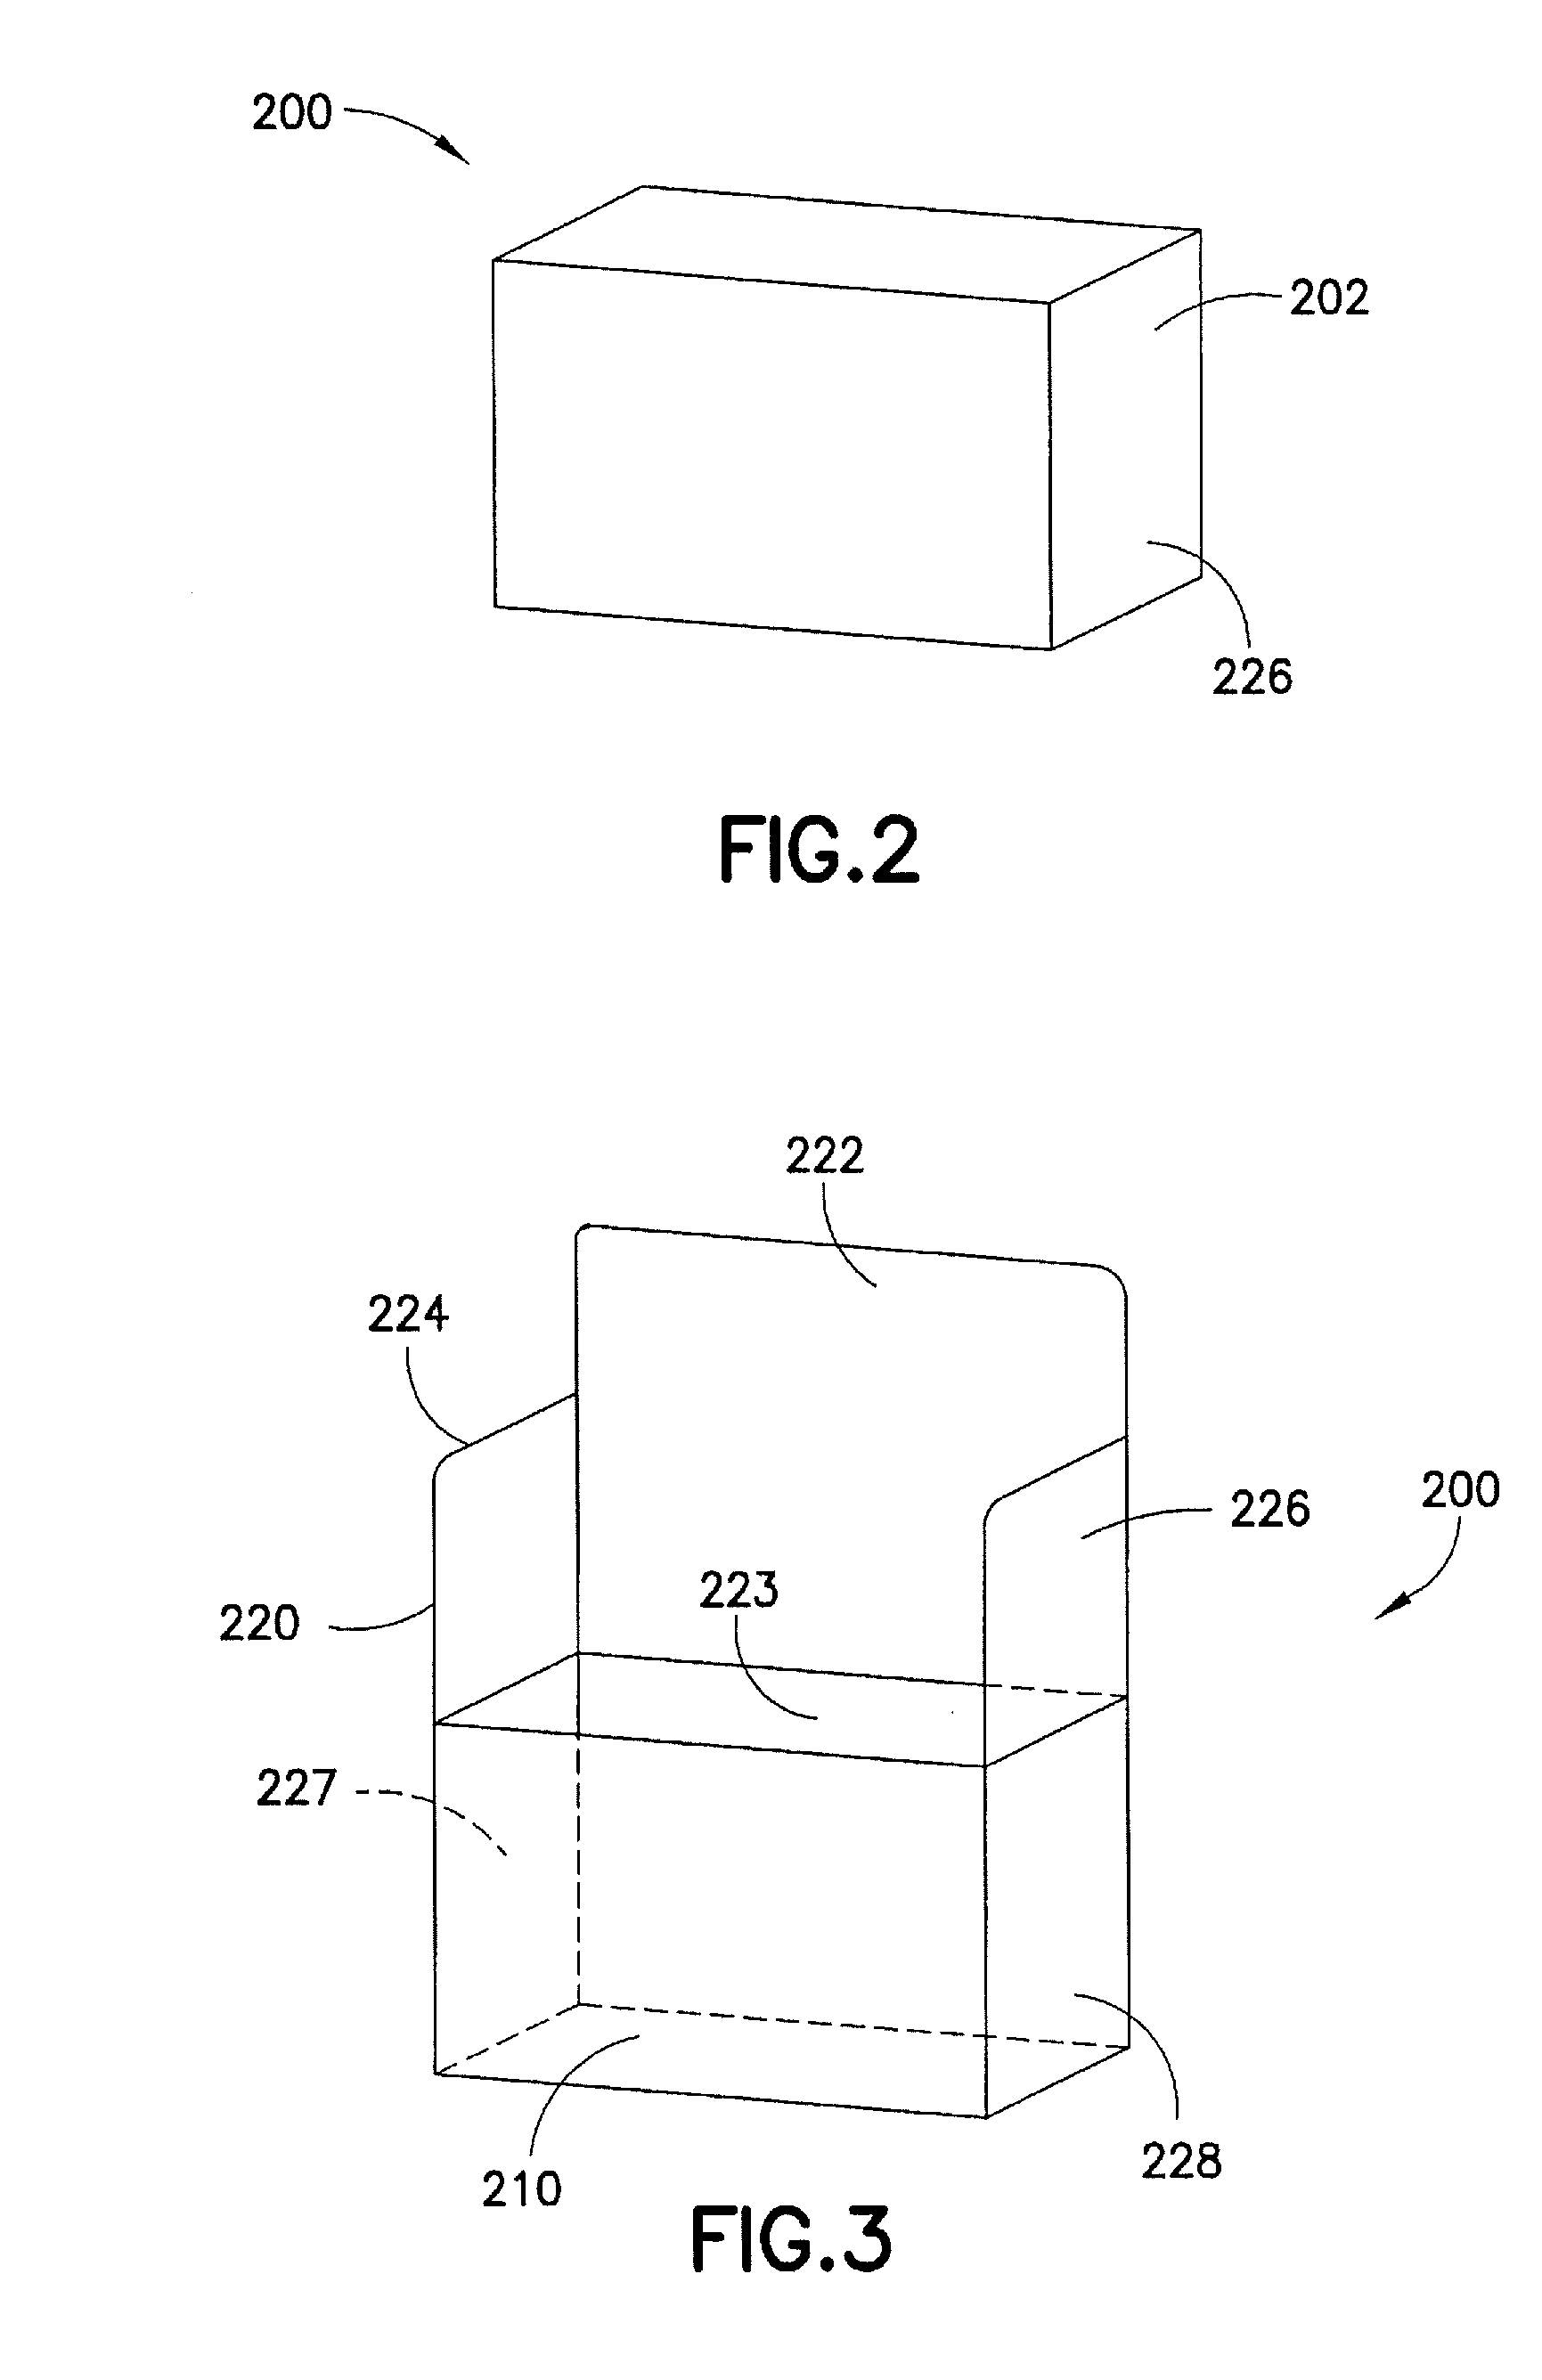 Product display system and method